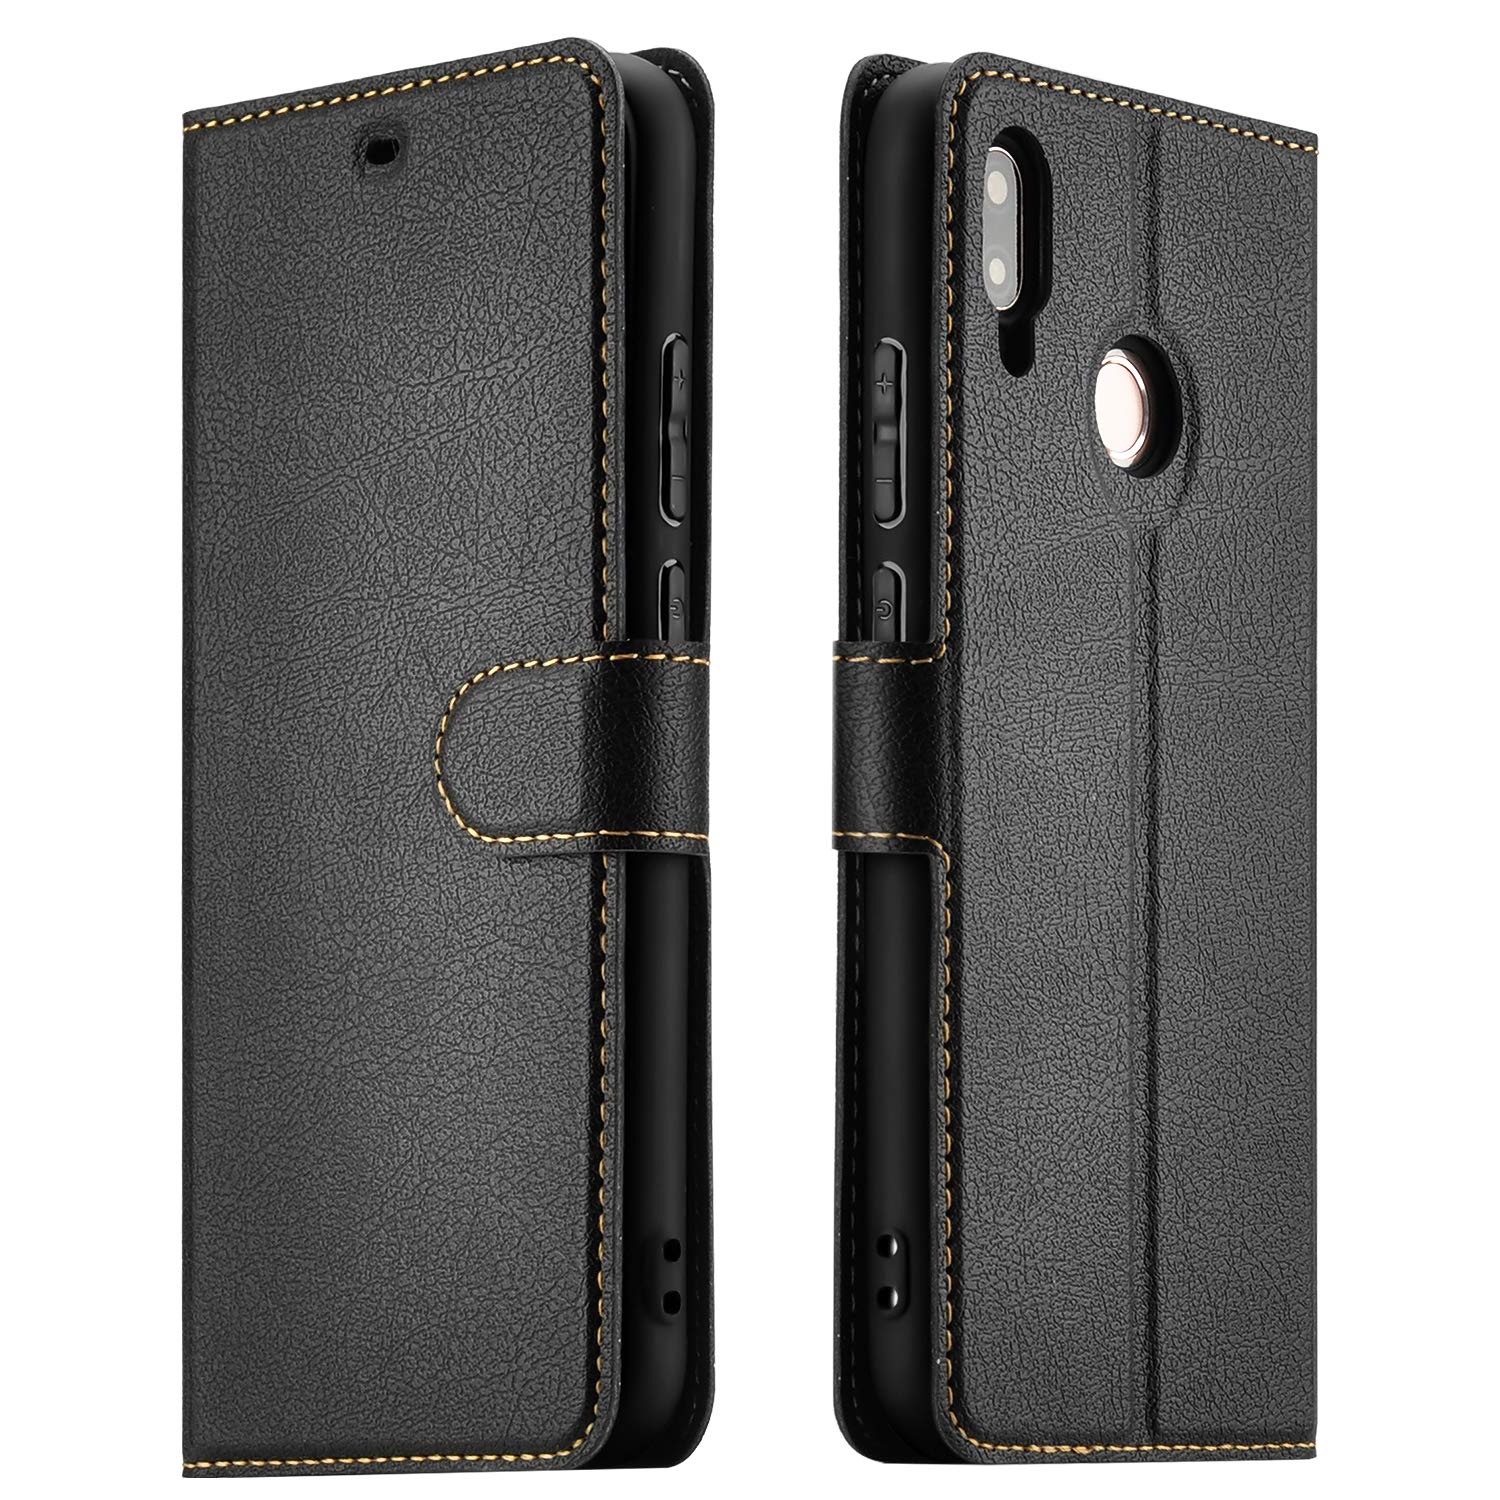 ELESNOW Case Compatible with Huawei P20 Lite, High-grade Leather Flip Wallet Phone Case Cover for Huawei P20 Lite